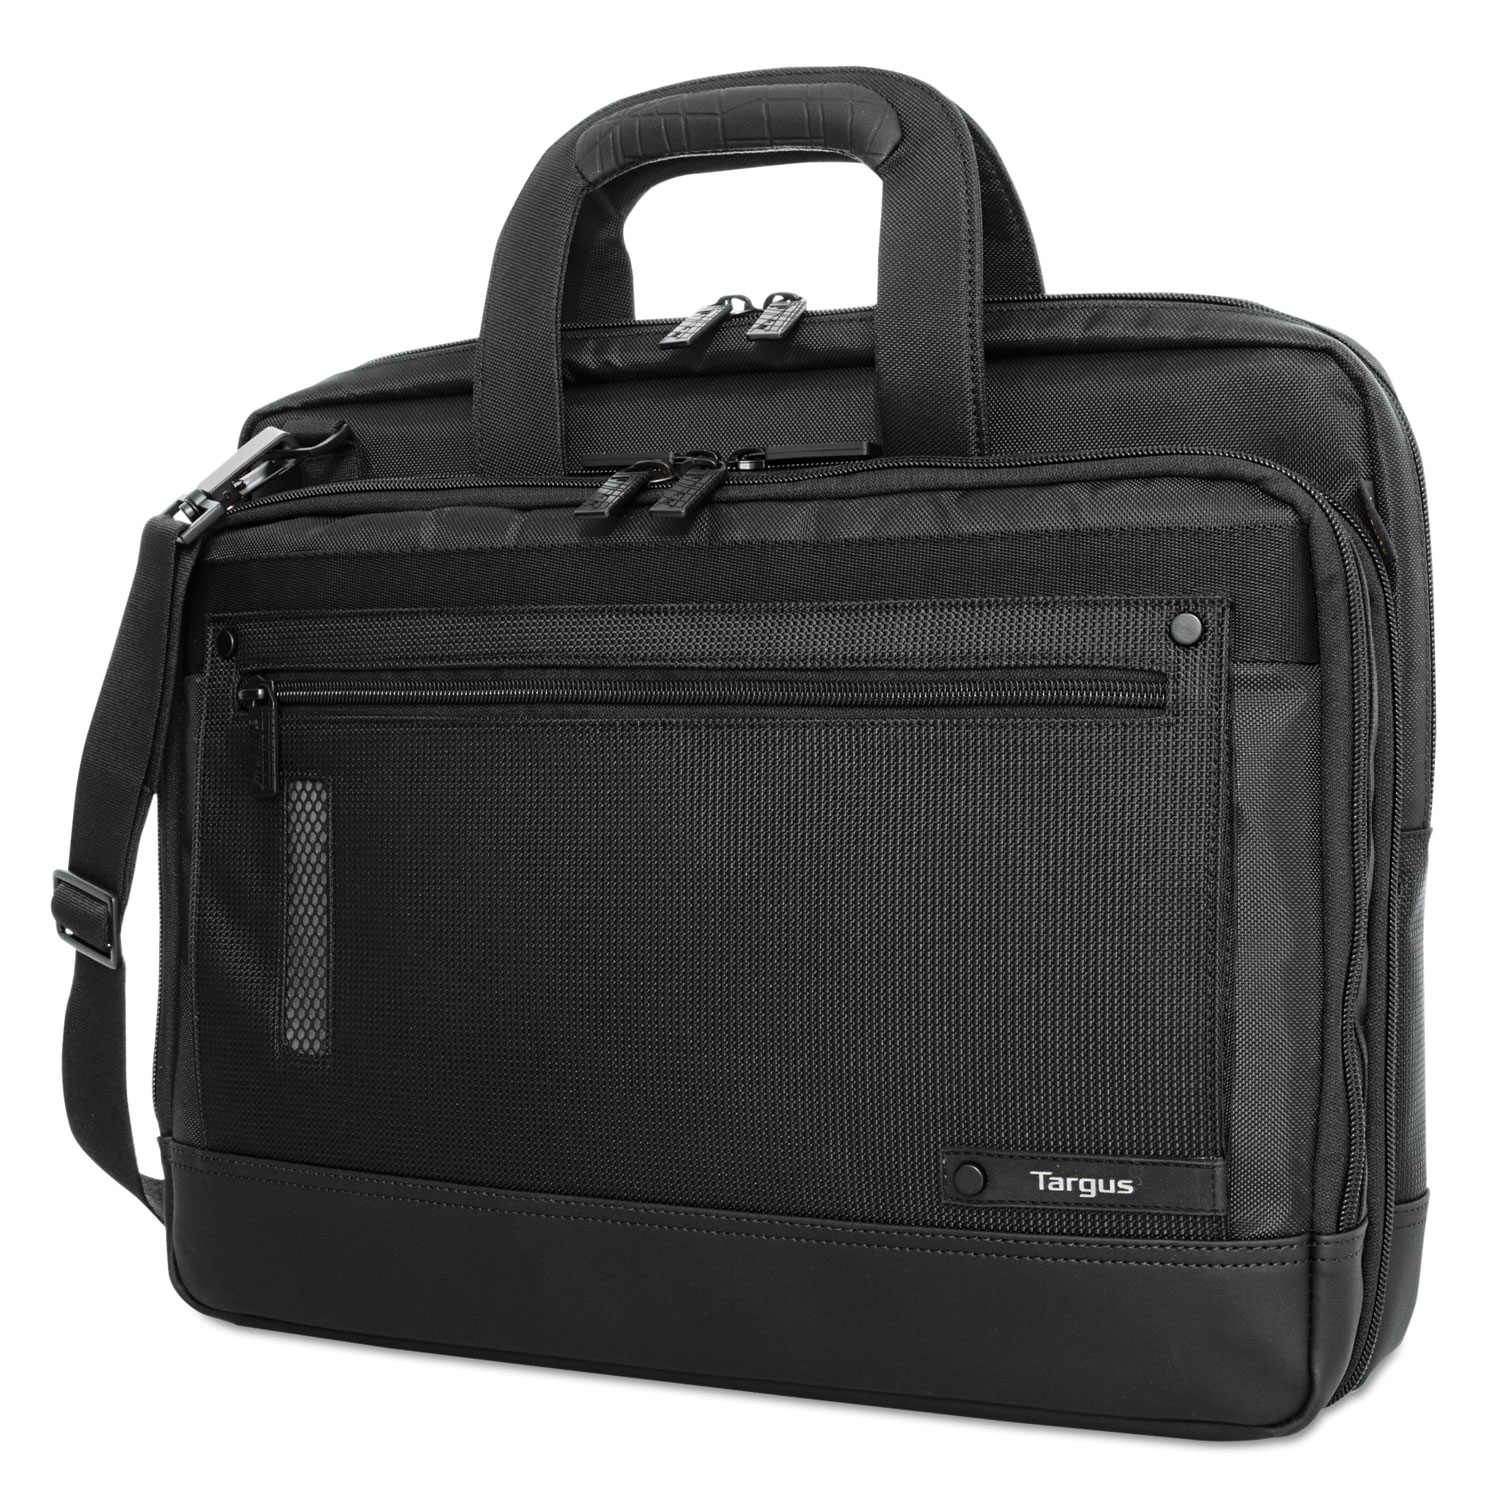 Revolution Topload TSA Case, Fits Devices Up to 16